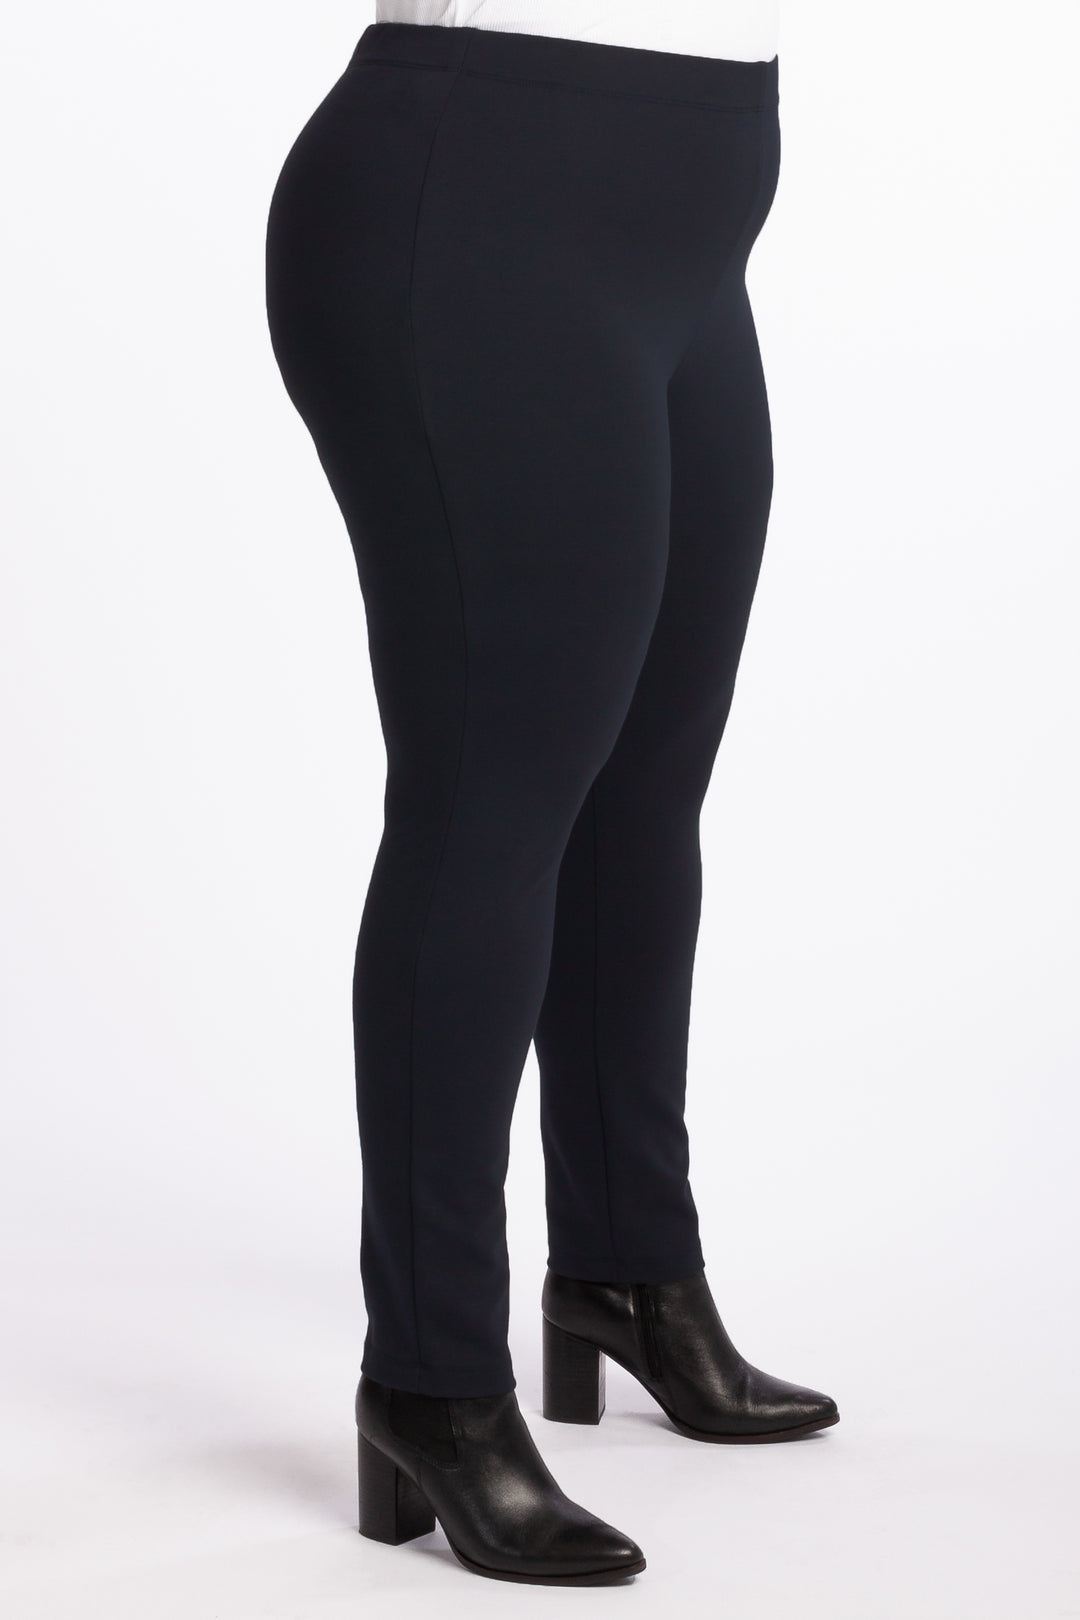 The Essential Ponte Legging - Navy -  STOCK AVAILABLE - XL (24/26)